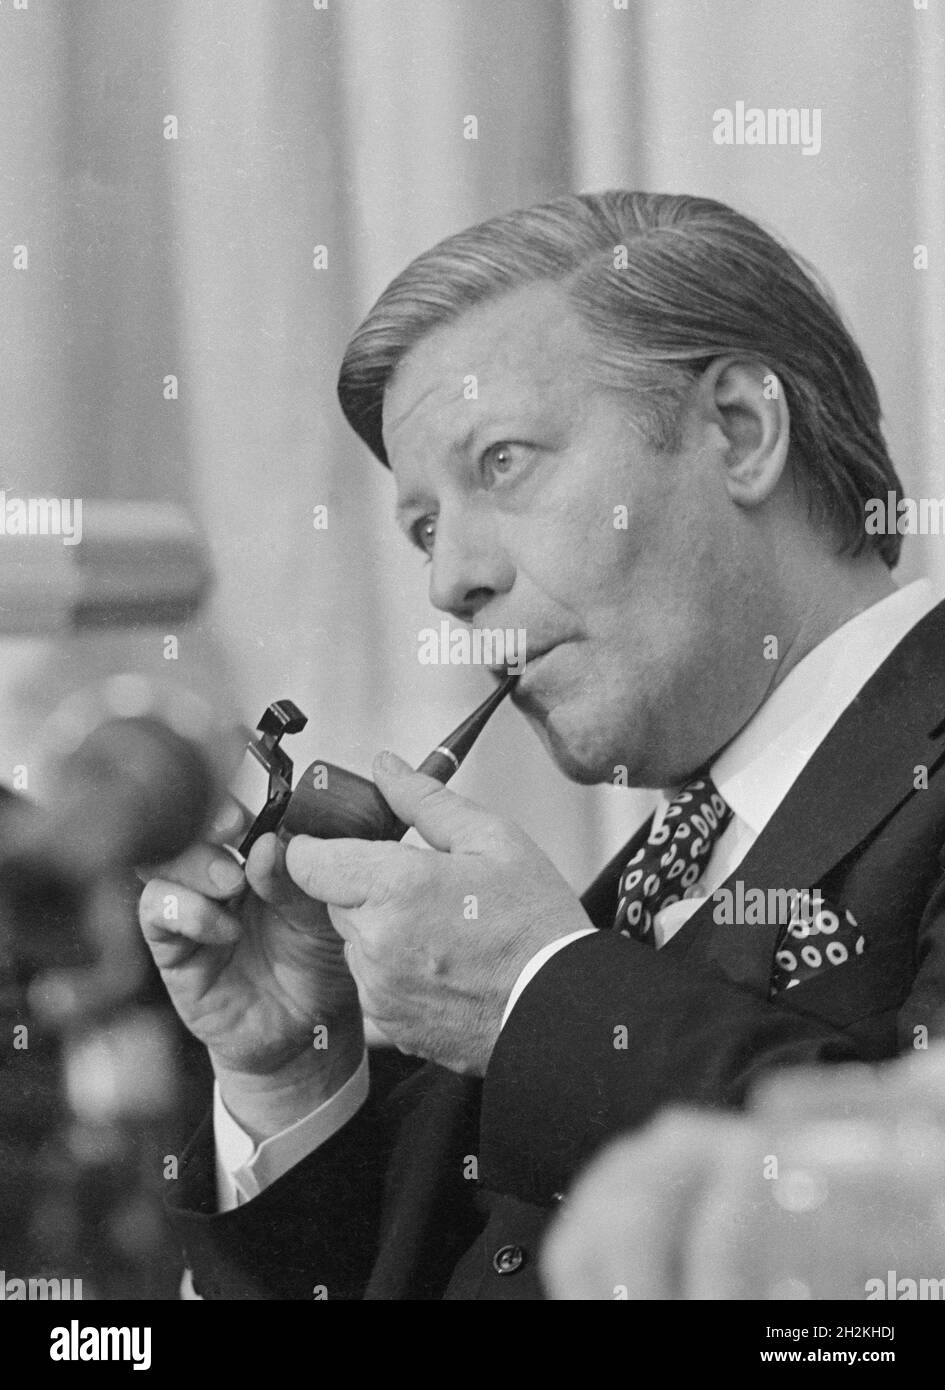 Helmut Schmidt, born 23 December 1918 is a German Social Democratic politician who served as Chancellor of West Germany from 1974 to 1982 - Stock Photo